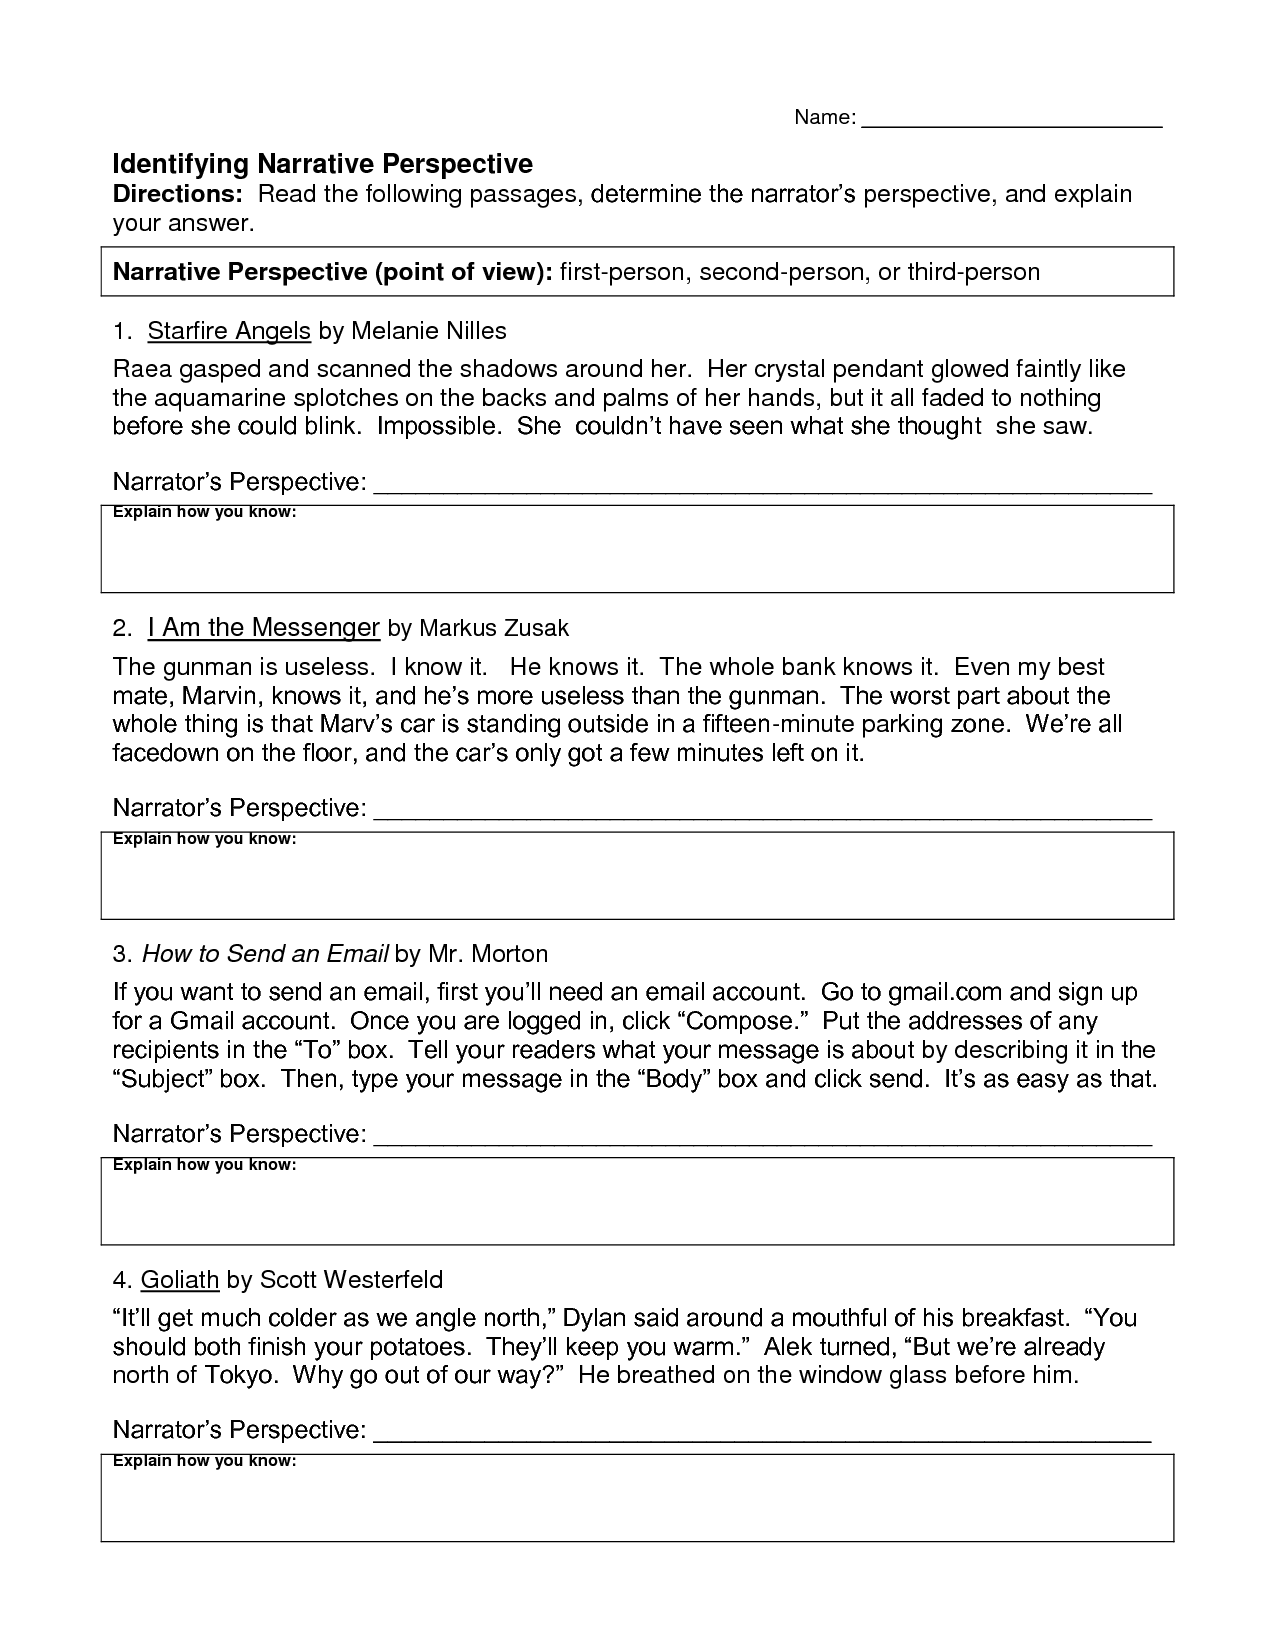 17 Best Images of Worksheets First Second Third  Third Person Point of View Worksheets, Ordinal 